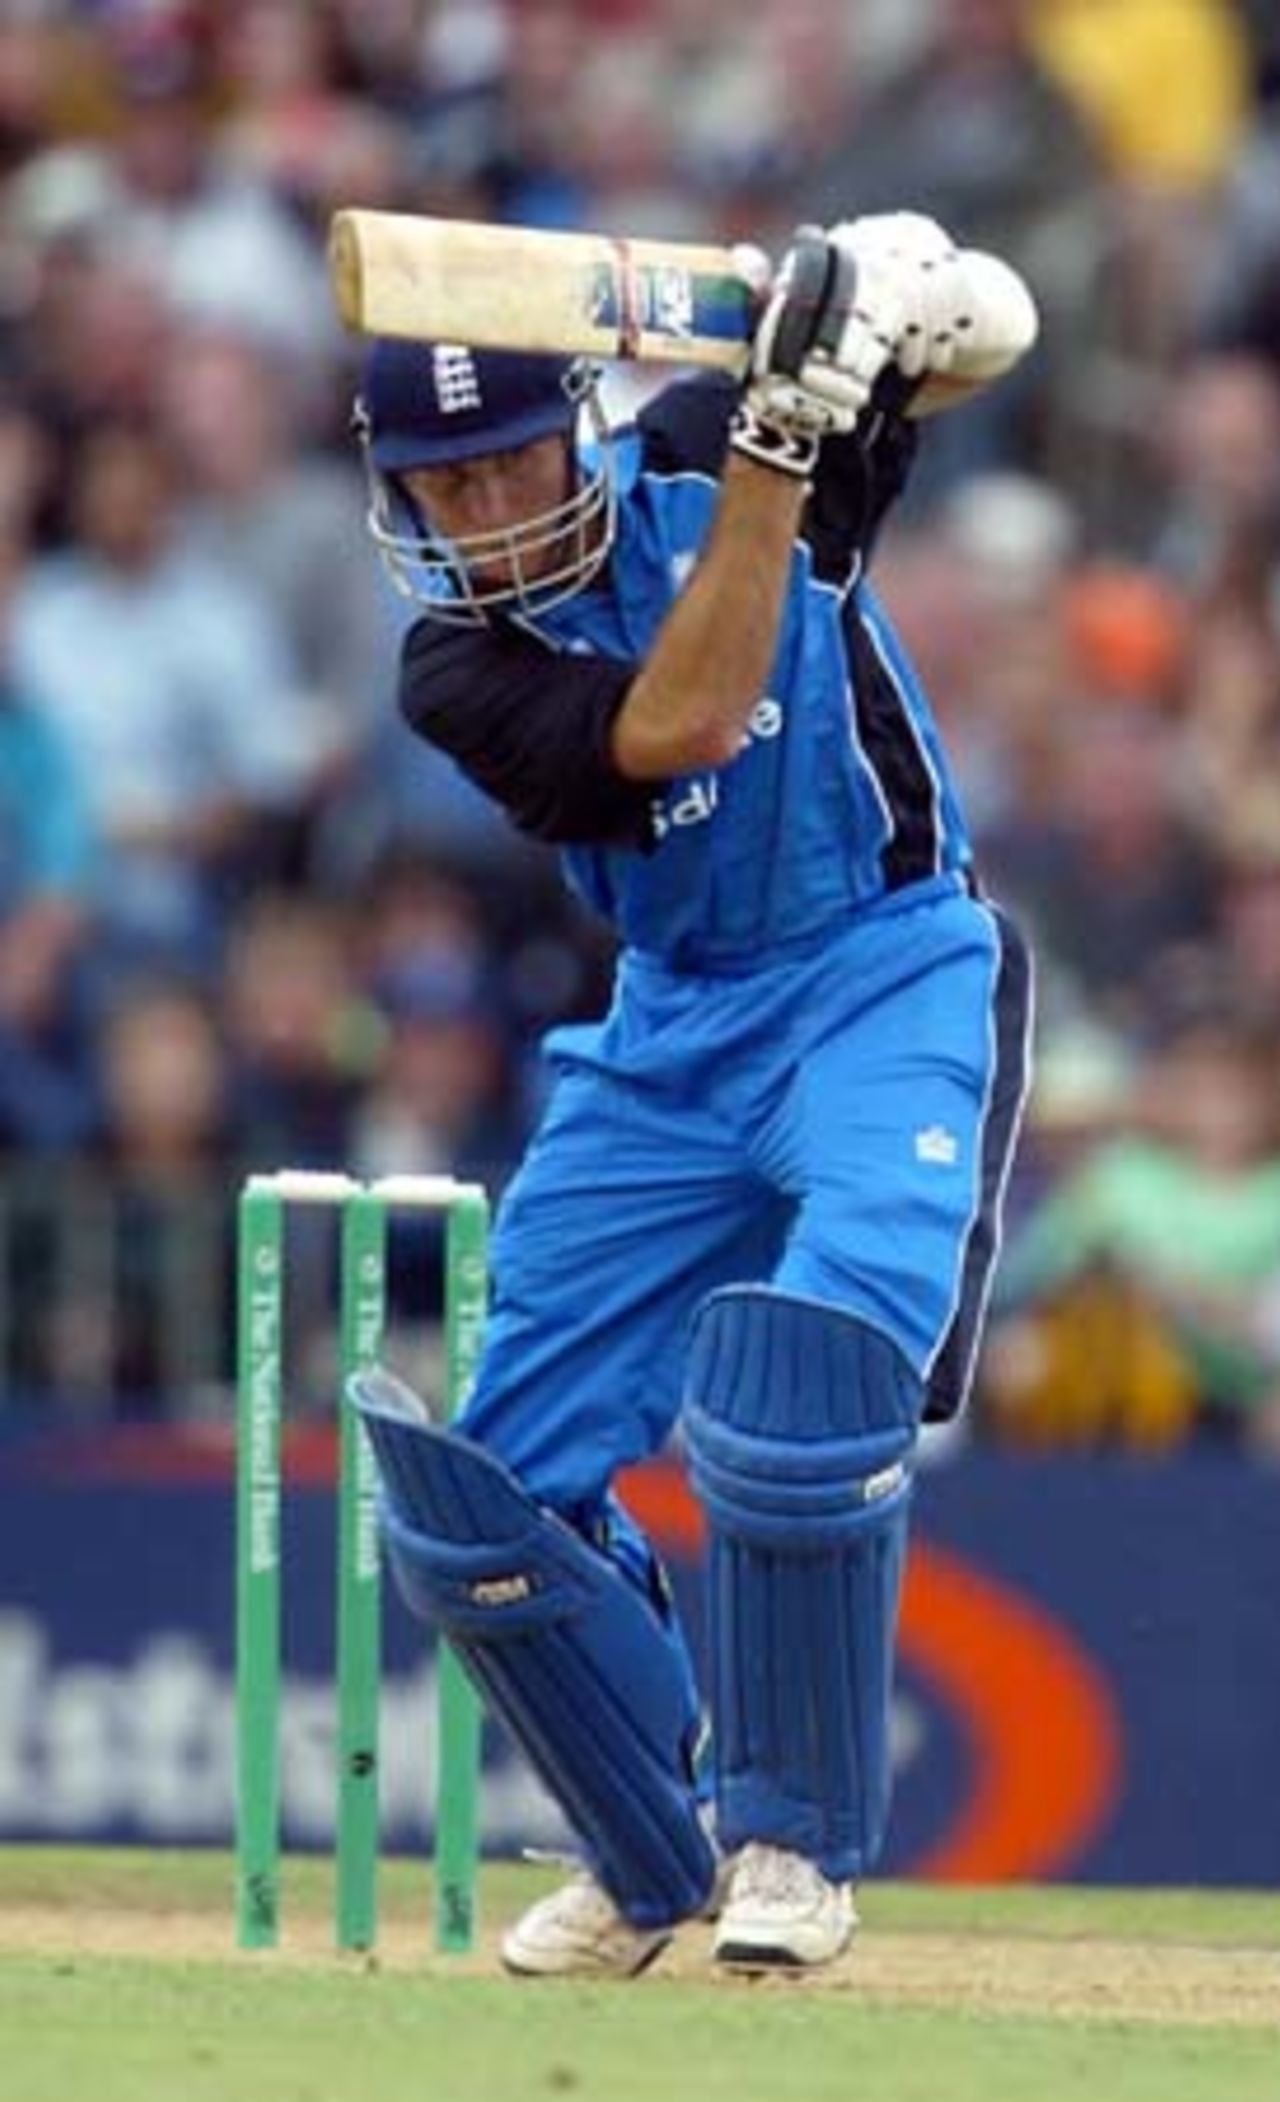 England batsman Michael Vaughan drives a delivery from New Zealand bowler Chris Cairns during his innings of 59. 4th ODI: New Zealand v England at Eden Park, Auckland, 23 February 2002.